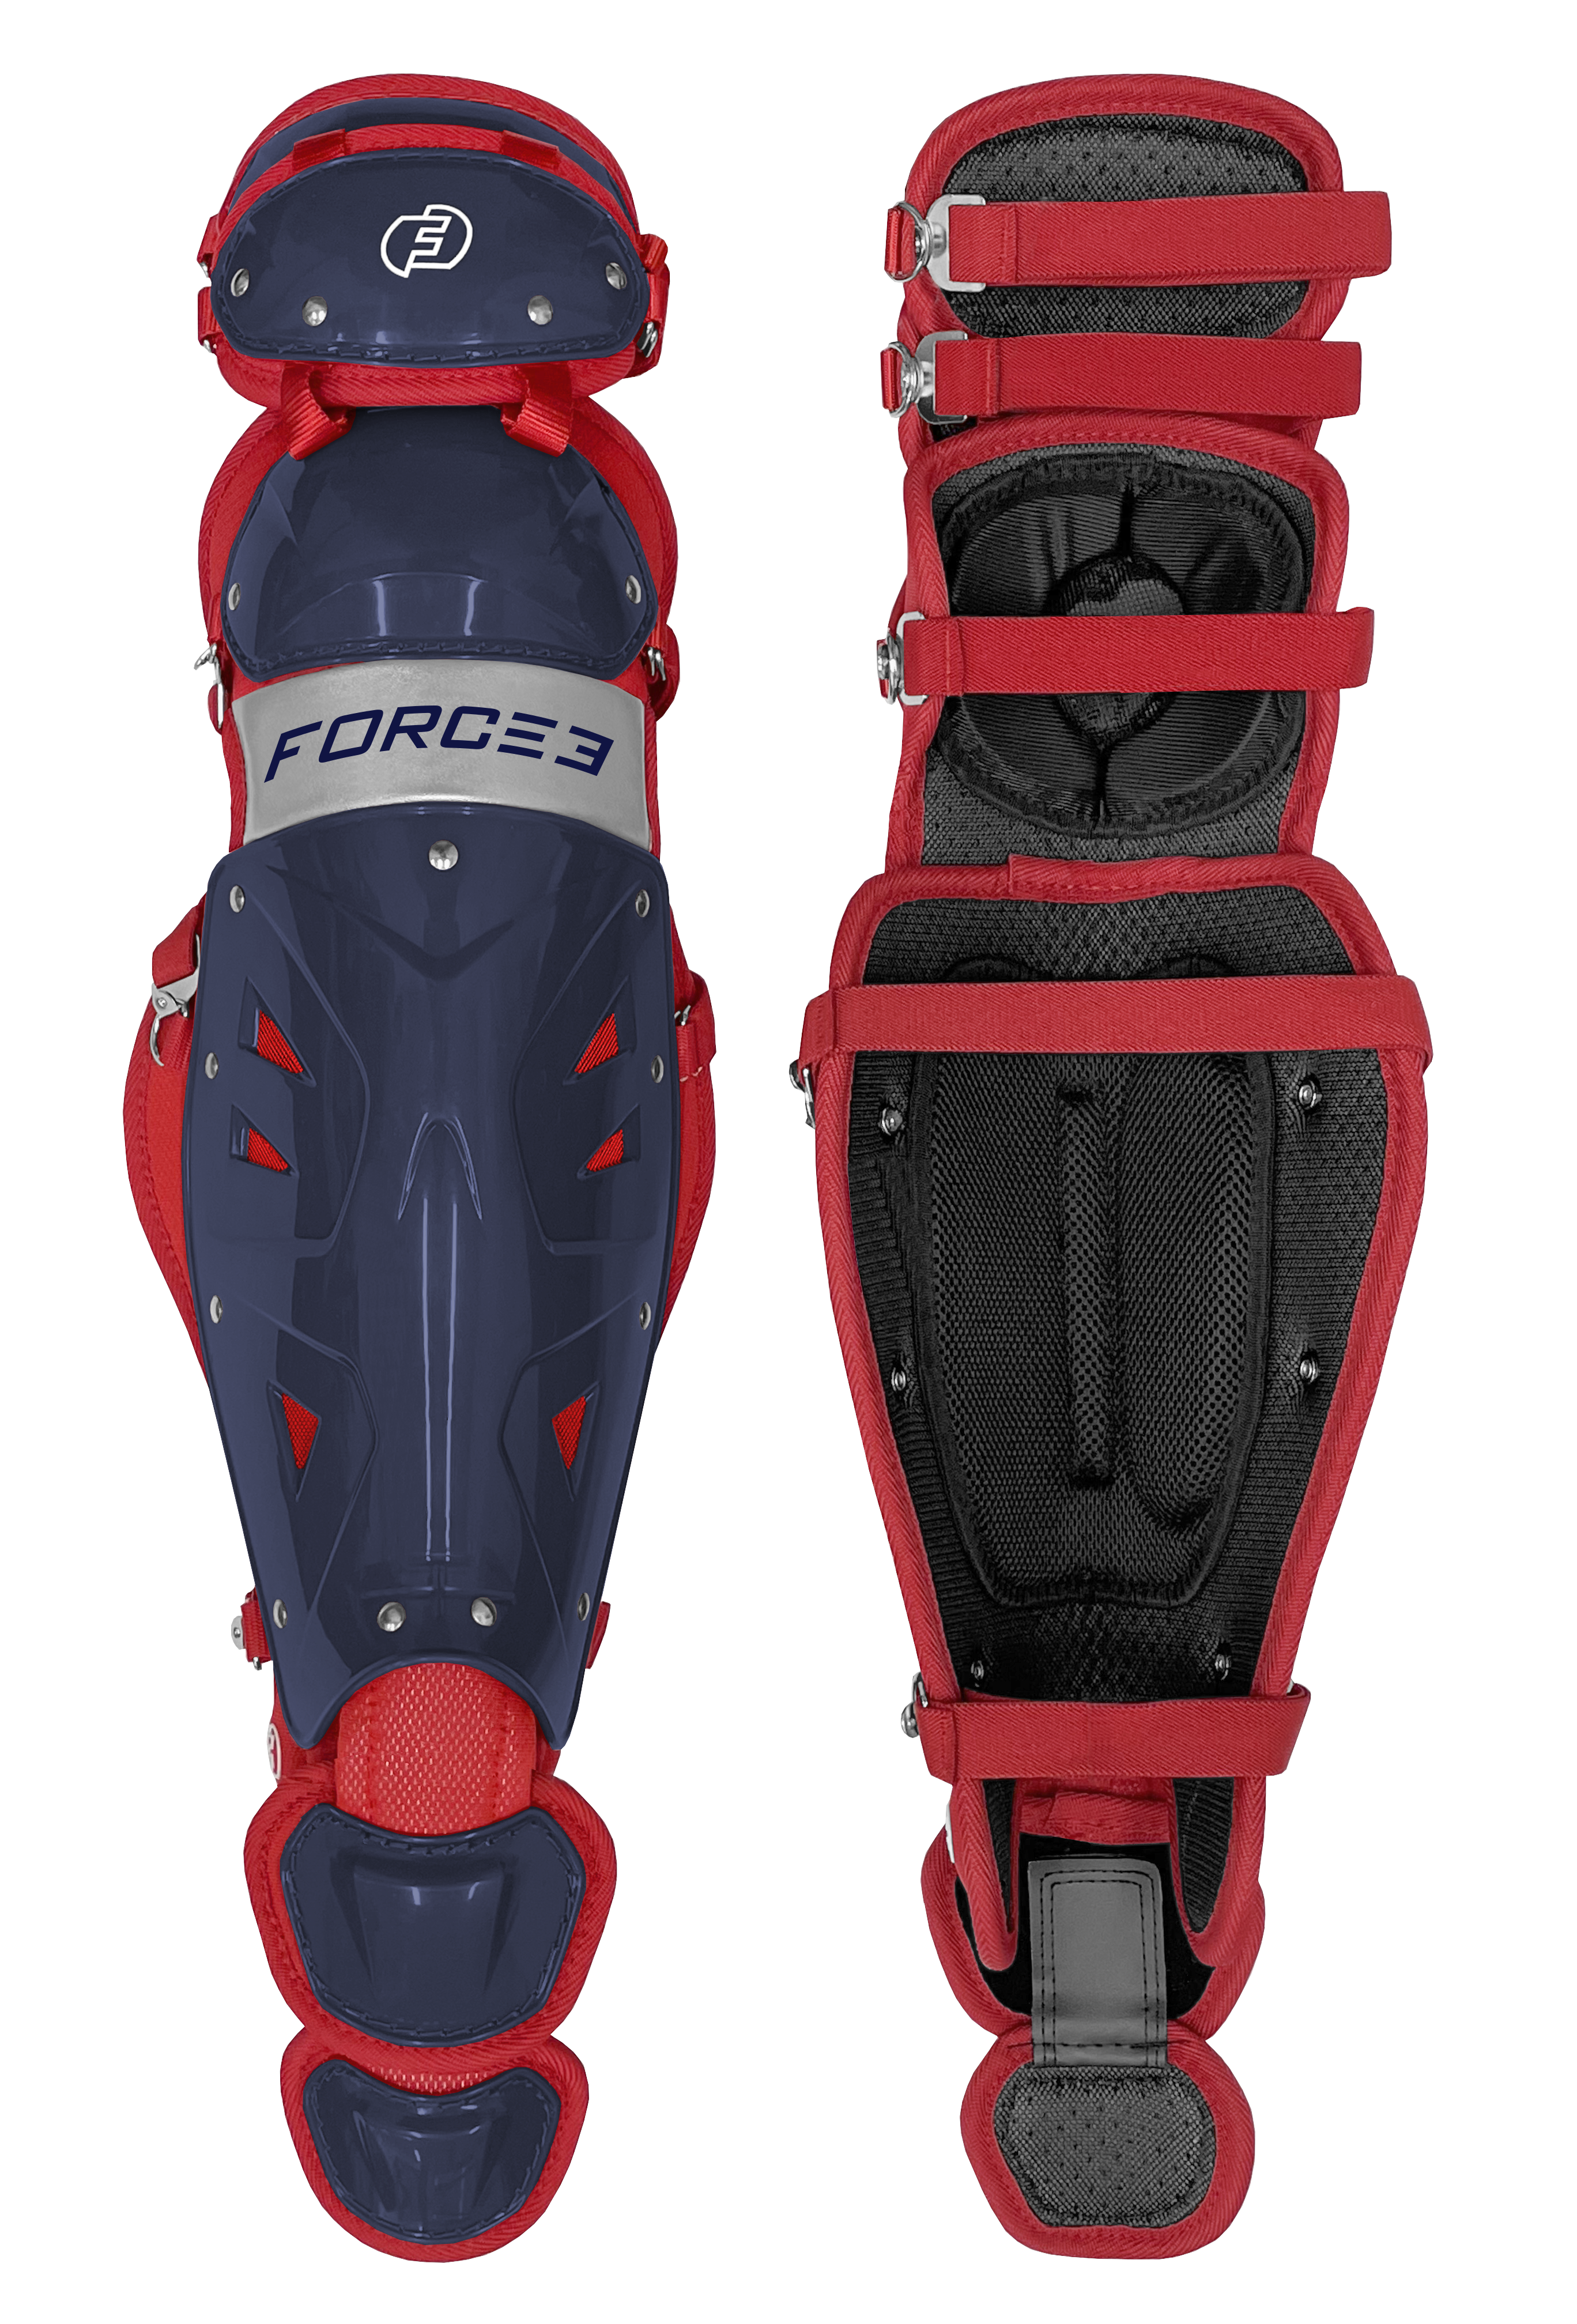 Force3 Youth | Pro Gear Catcher Shin Guards with Dupont Kevlar - Pro Game Sports